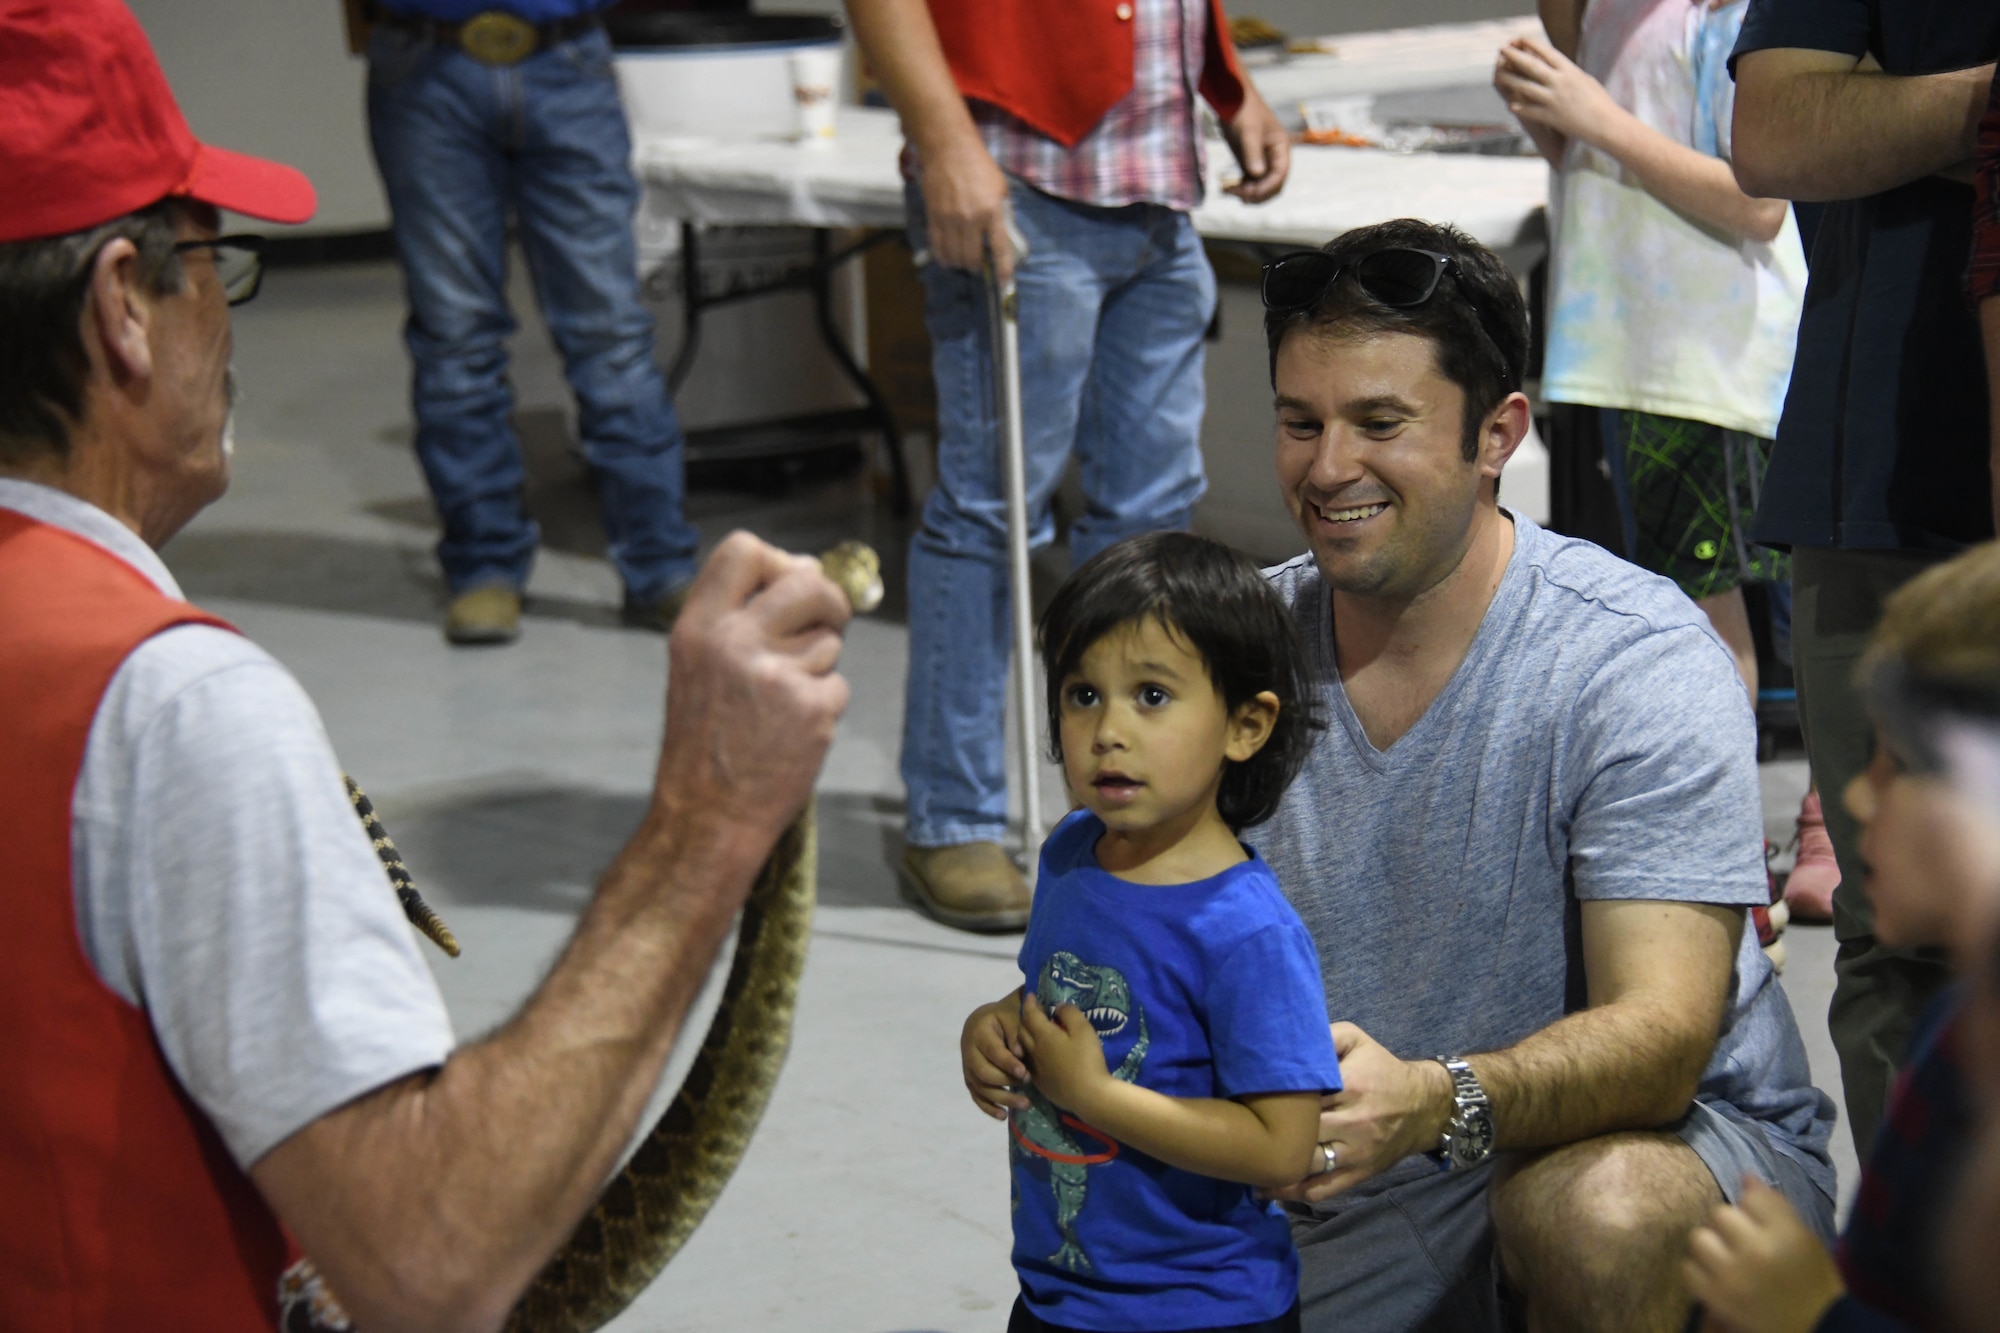 A child looks at a rattlesnake at the Committee of 100 dinner event in Altus, Oklahoma, April 11, 2022. More than 15 children attended the event to participate in bouncing houses, mechanical bull riding and the Mangum Rattlesnake Derby appearance. (U.S. Air Force photo by Senior Airman Kayla Christenson)